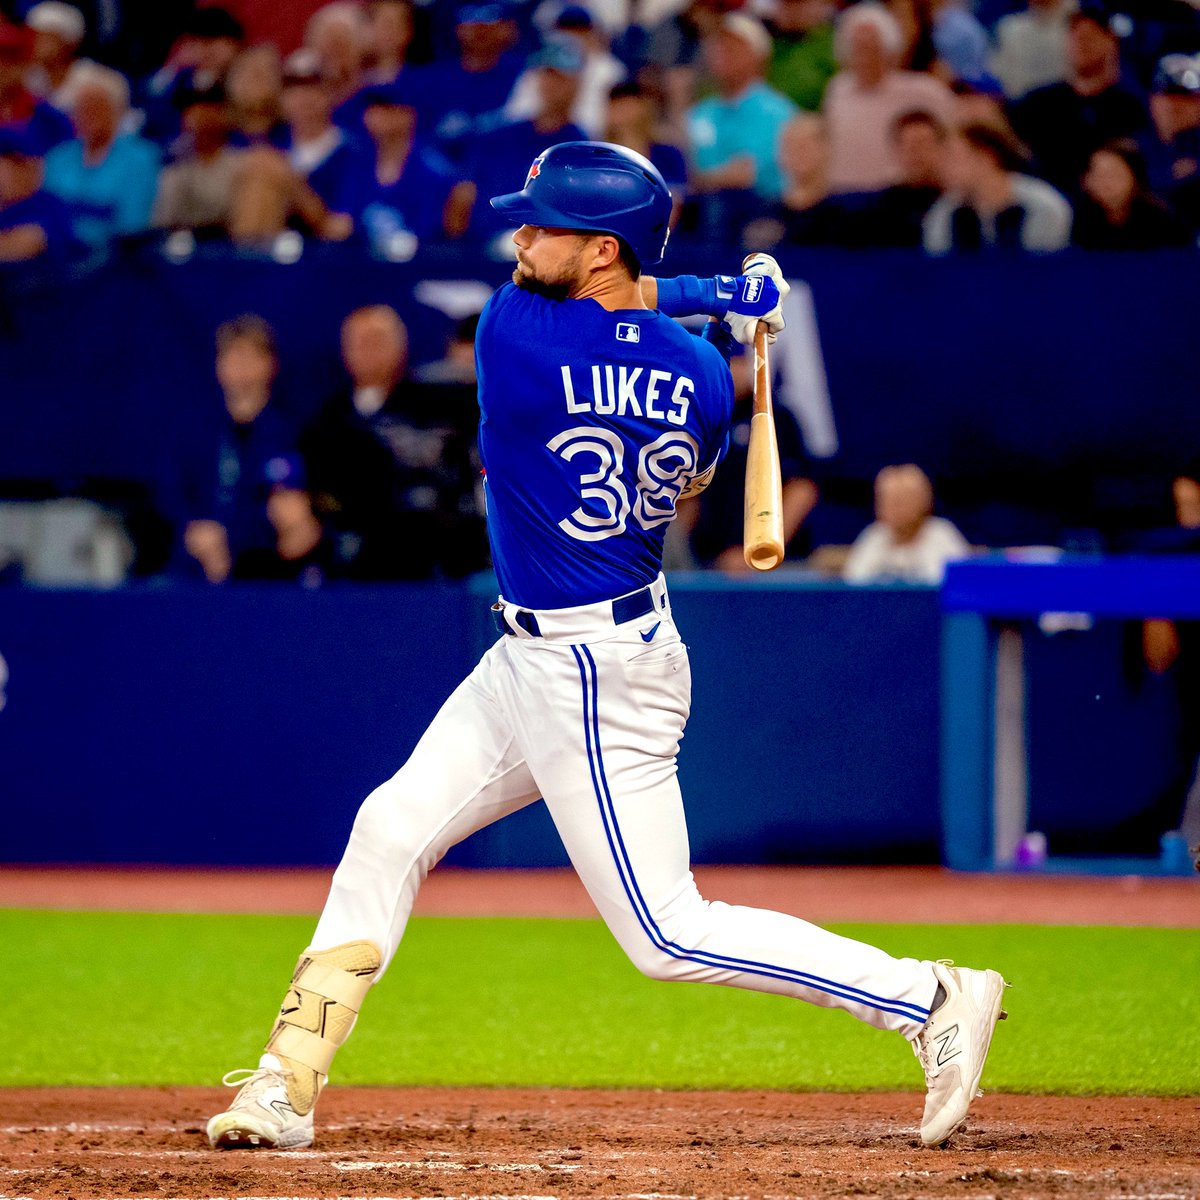 Nathan Lukes tonight for Buffalo: 

6 for 6
HR
4 RBI
2 2B

#BlueJays #TOTheCore